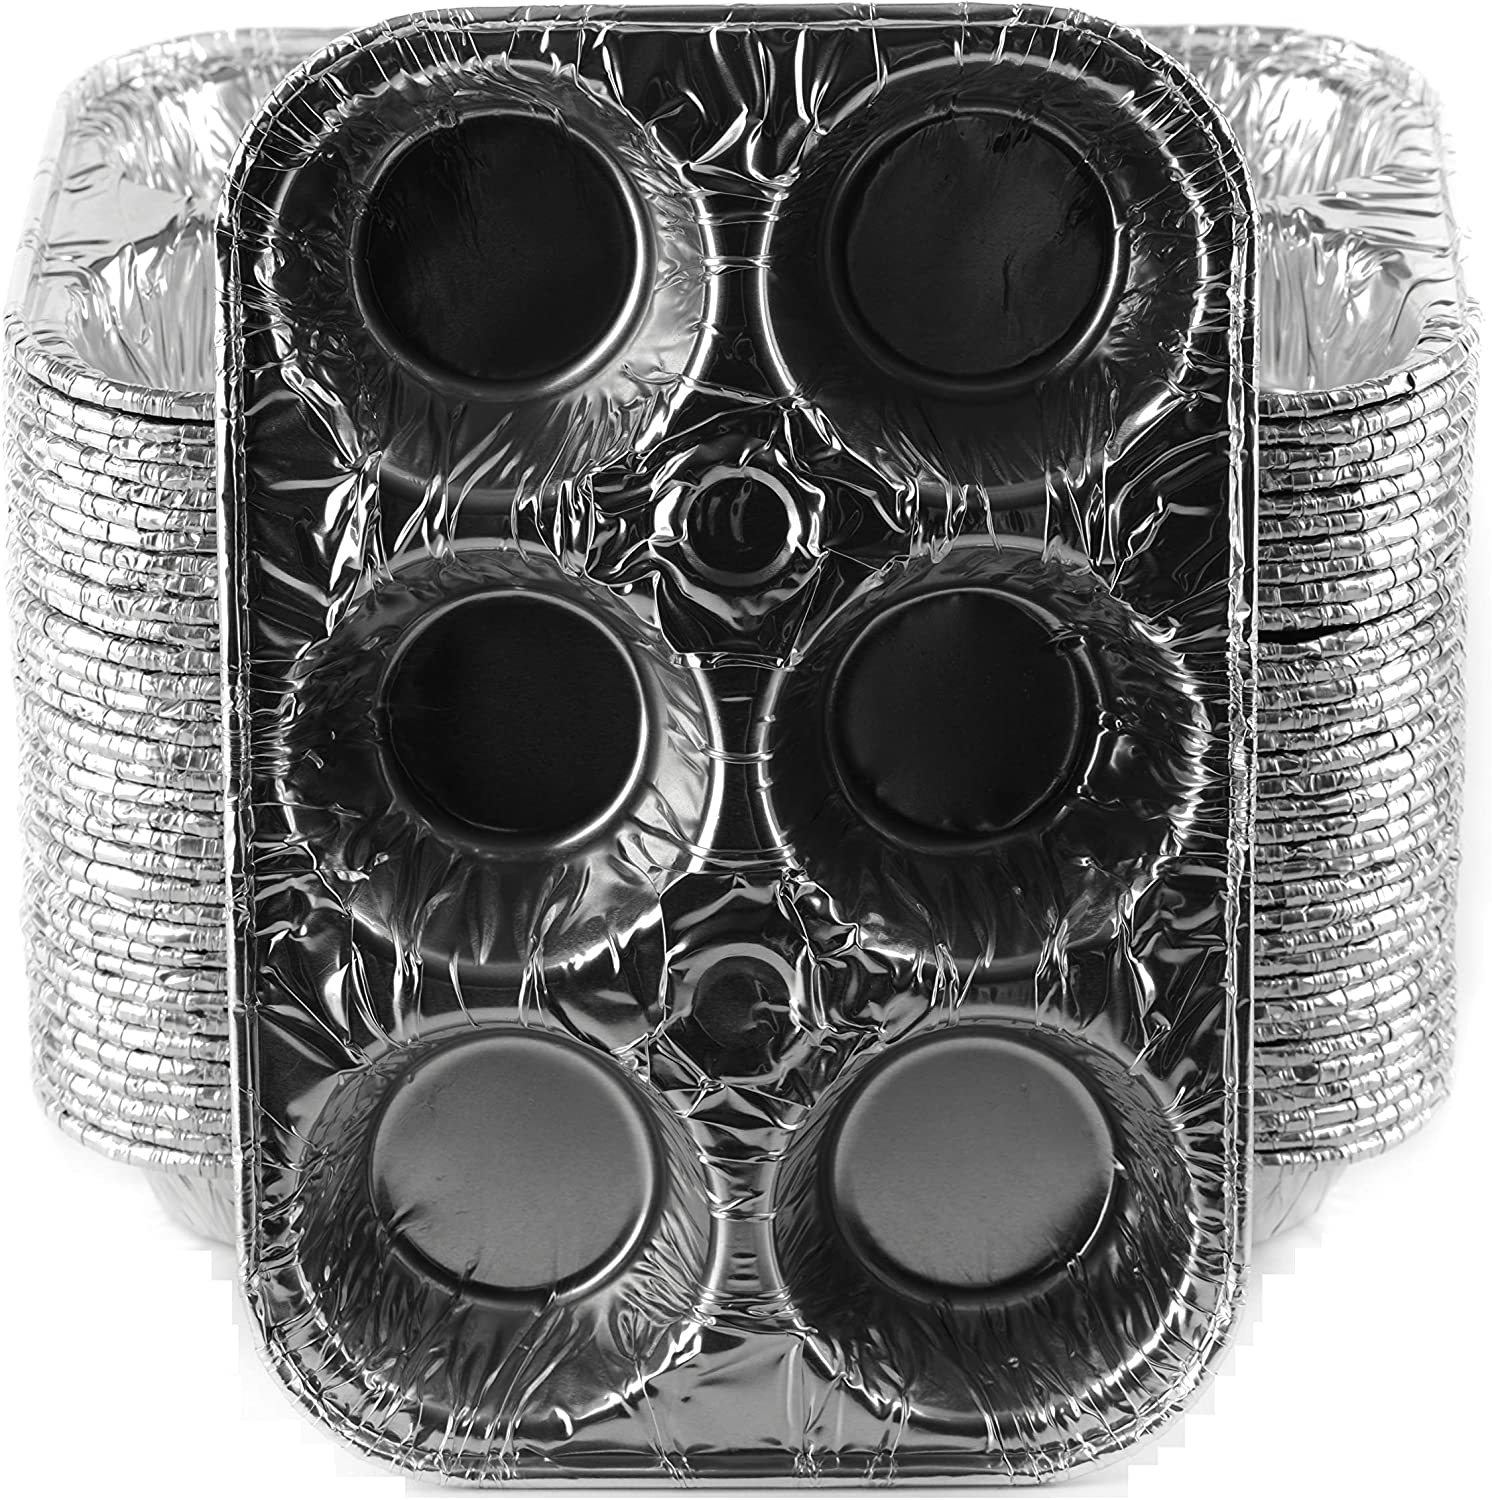 [150 Pack] Aluminum 6-Cup Muffin Pan - Disposable Aluminum Cupcake Pans - Strong, Durable, Reusable, Recyclable - Muffin Tin Great for Baking Cupcakes